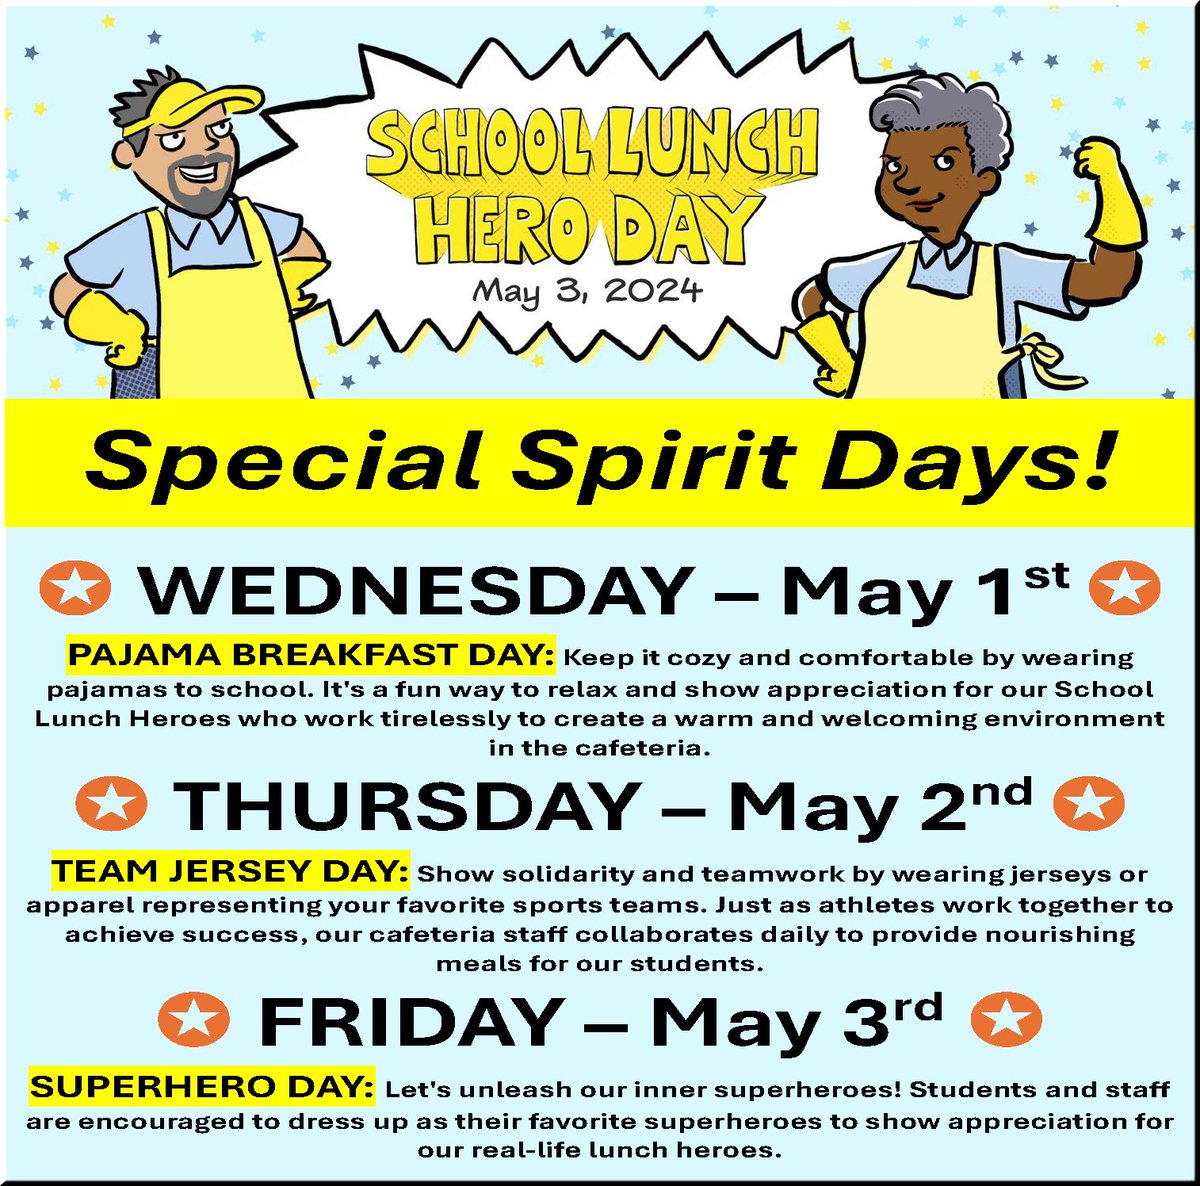 SCHOOL LUNCH HERO DAY is Friday, May 3rd. Help us celebrate and appreciate school nutrition employees with special SPIRIT DAYS this week! Be sure to thank these heroes for their dedication to fueling students for success! #Built4Bibb #WestsidePride #SchoolLunchHeroDay